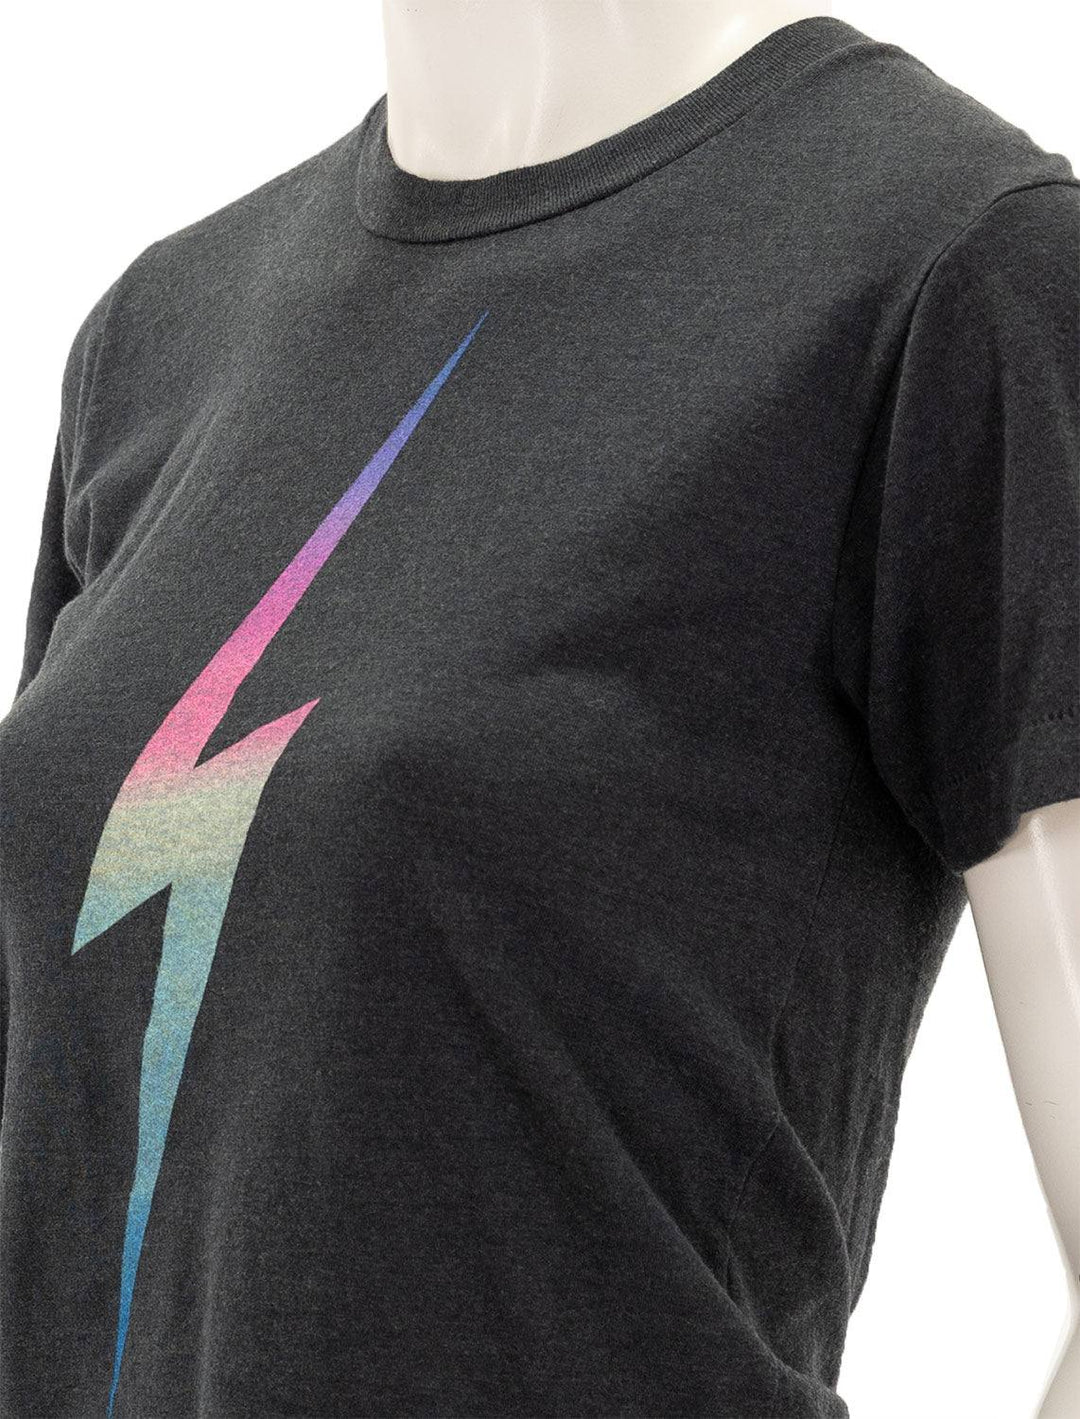 Close-up view of Aviator Nation's bolt boyfriend tee with rainbow pink.